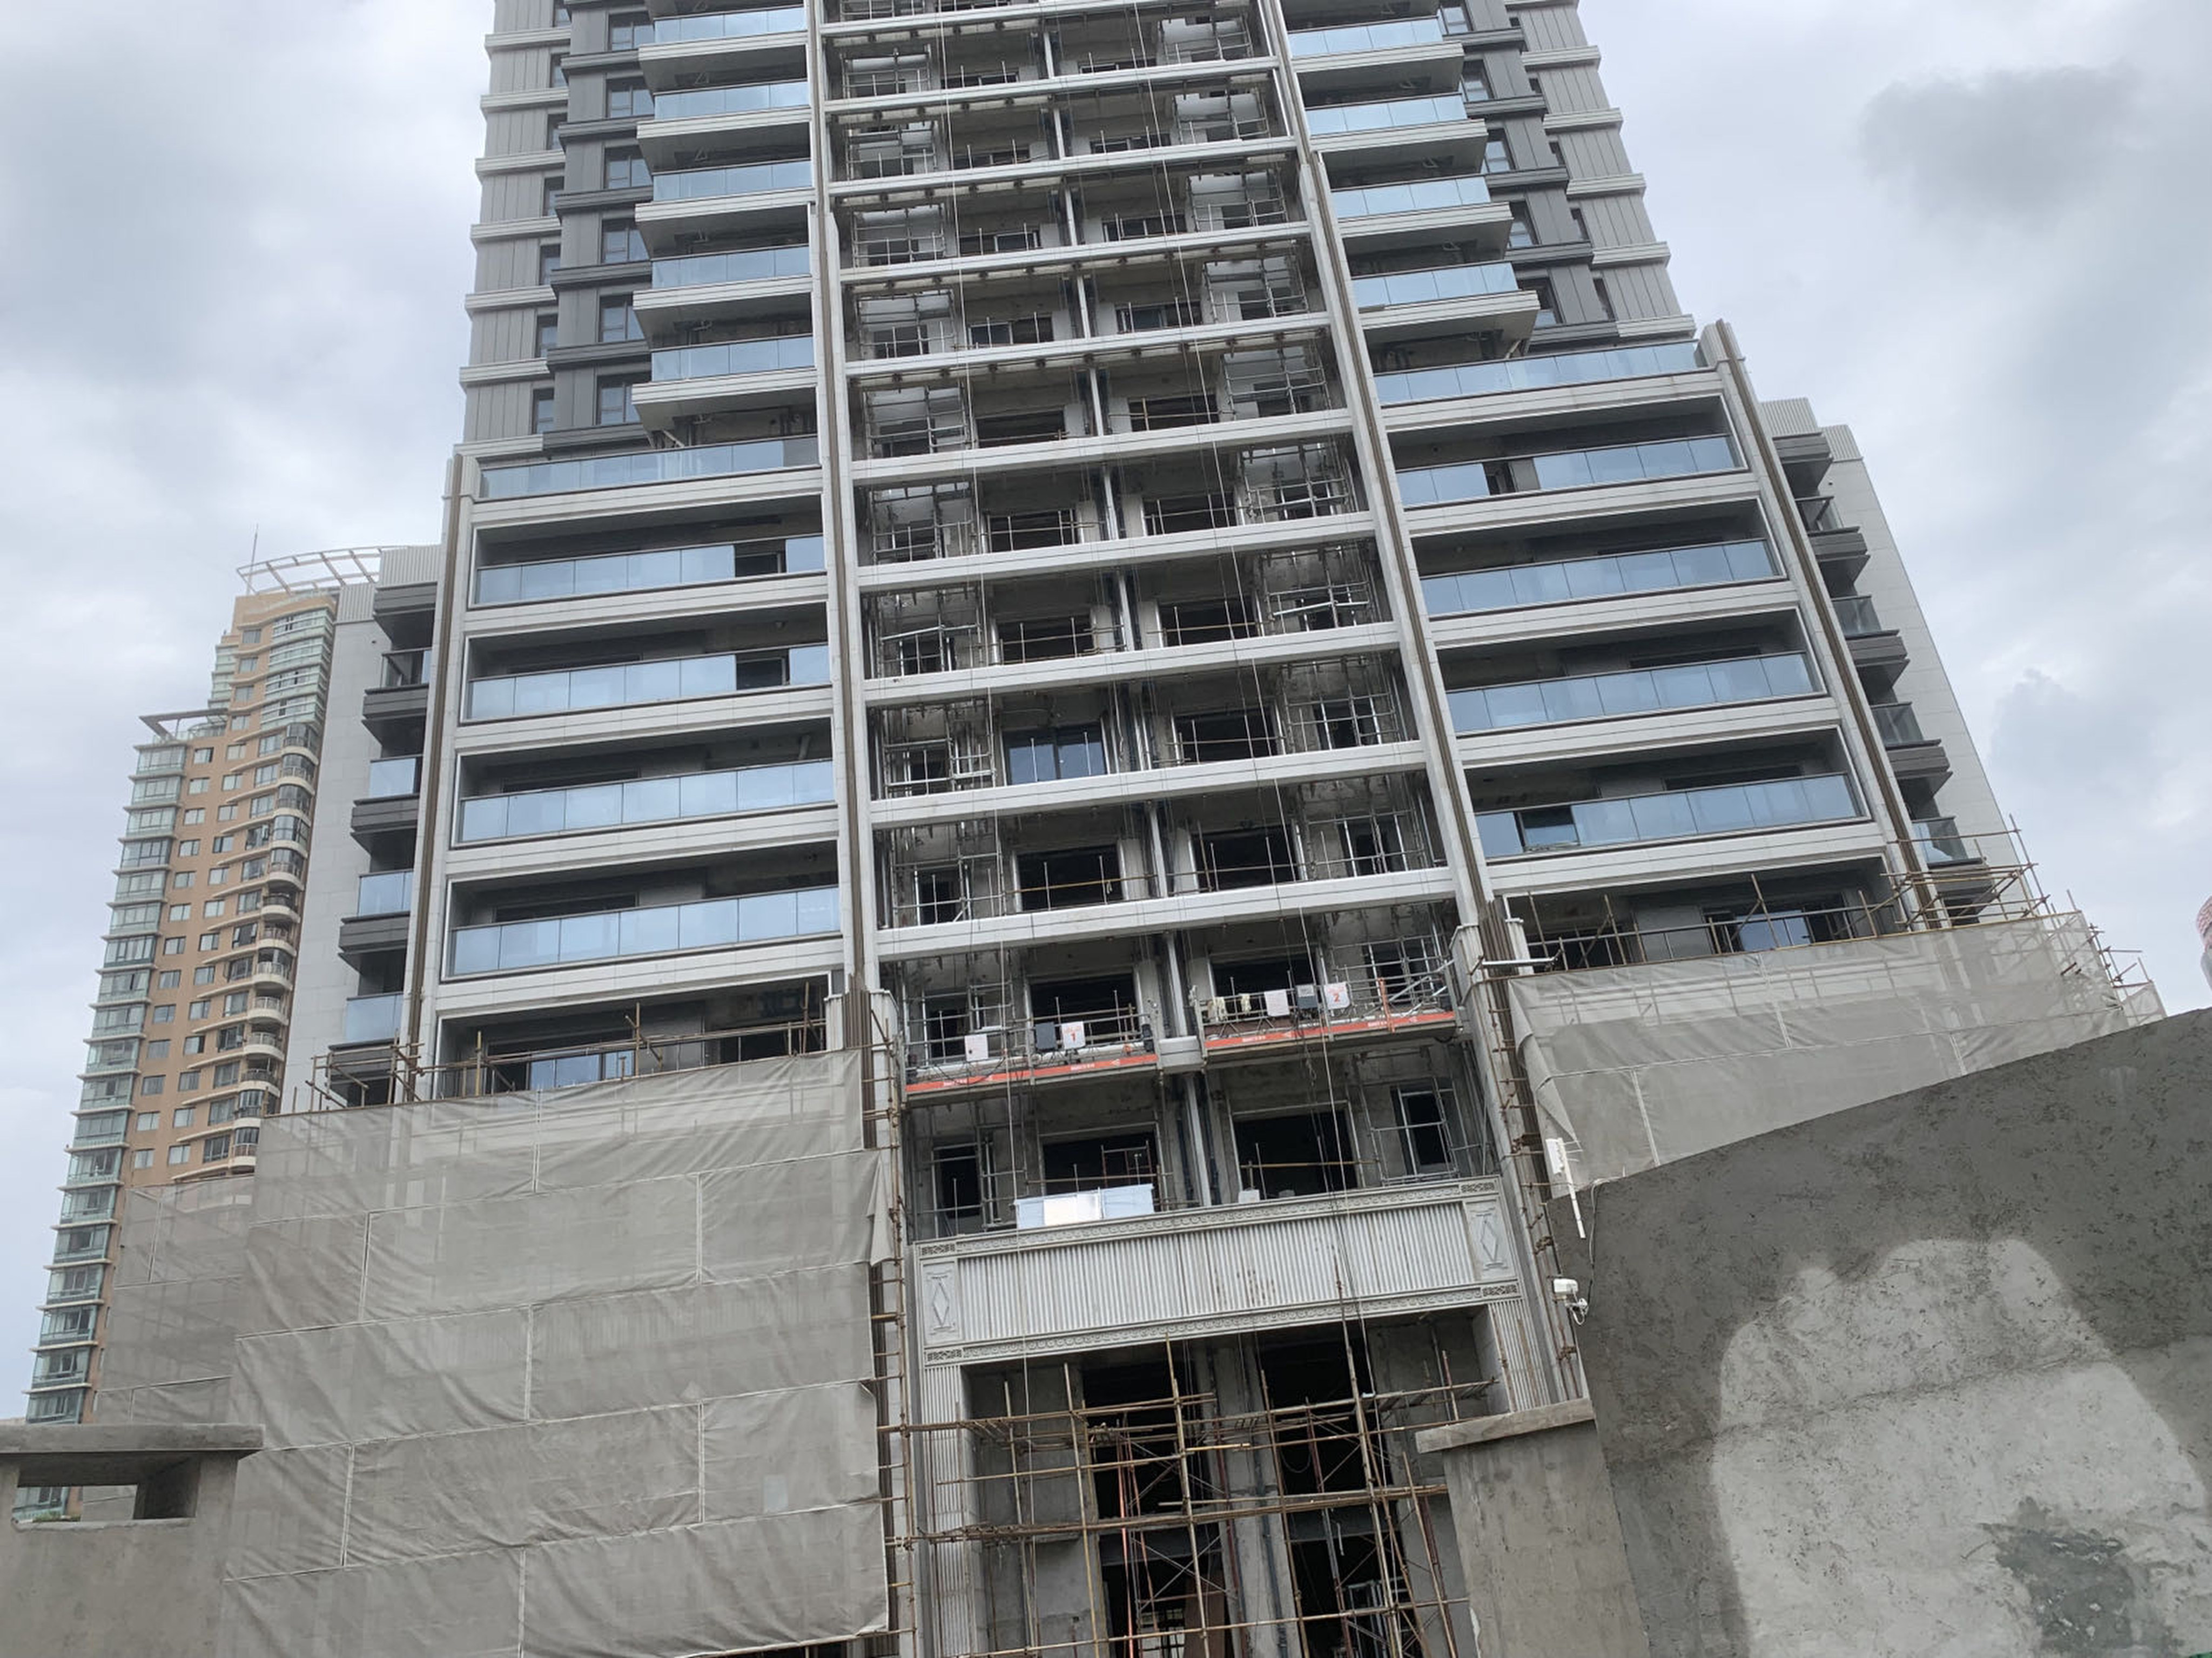 The unfinished The One-Rivera Shanghai residential project on Thursday. Photo: Daniel Ren